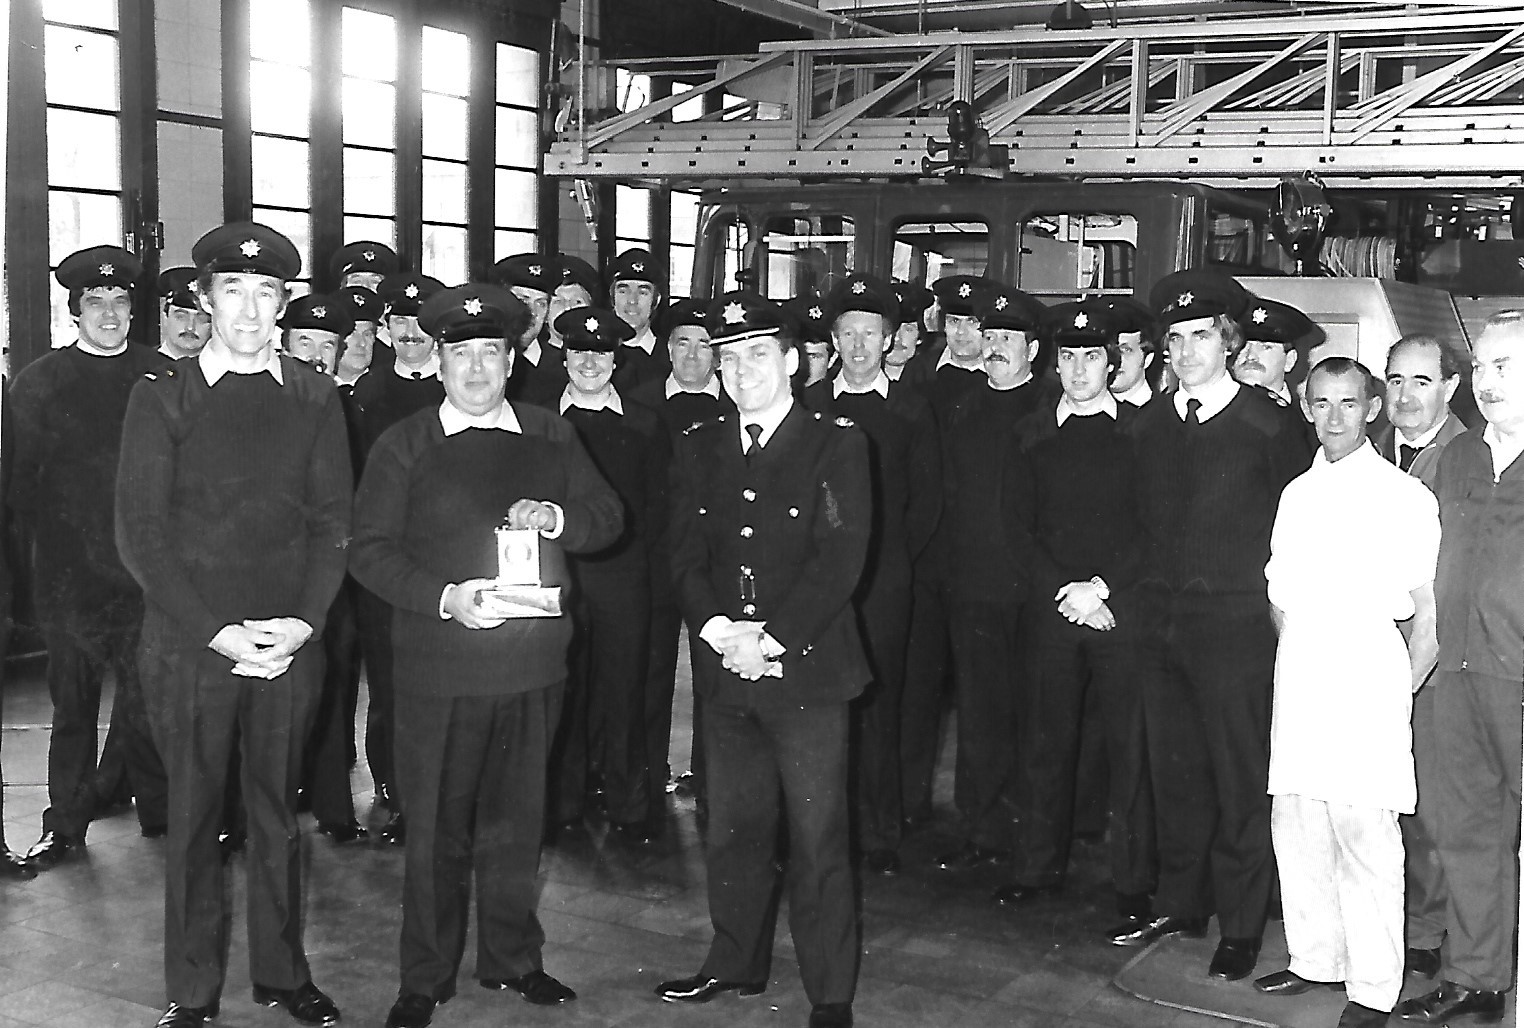 Firefighters at Southport Fire Station gather to celebrate a retirement from the force in November 1982